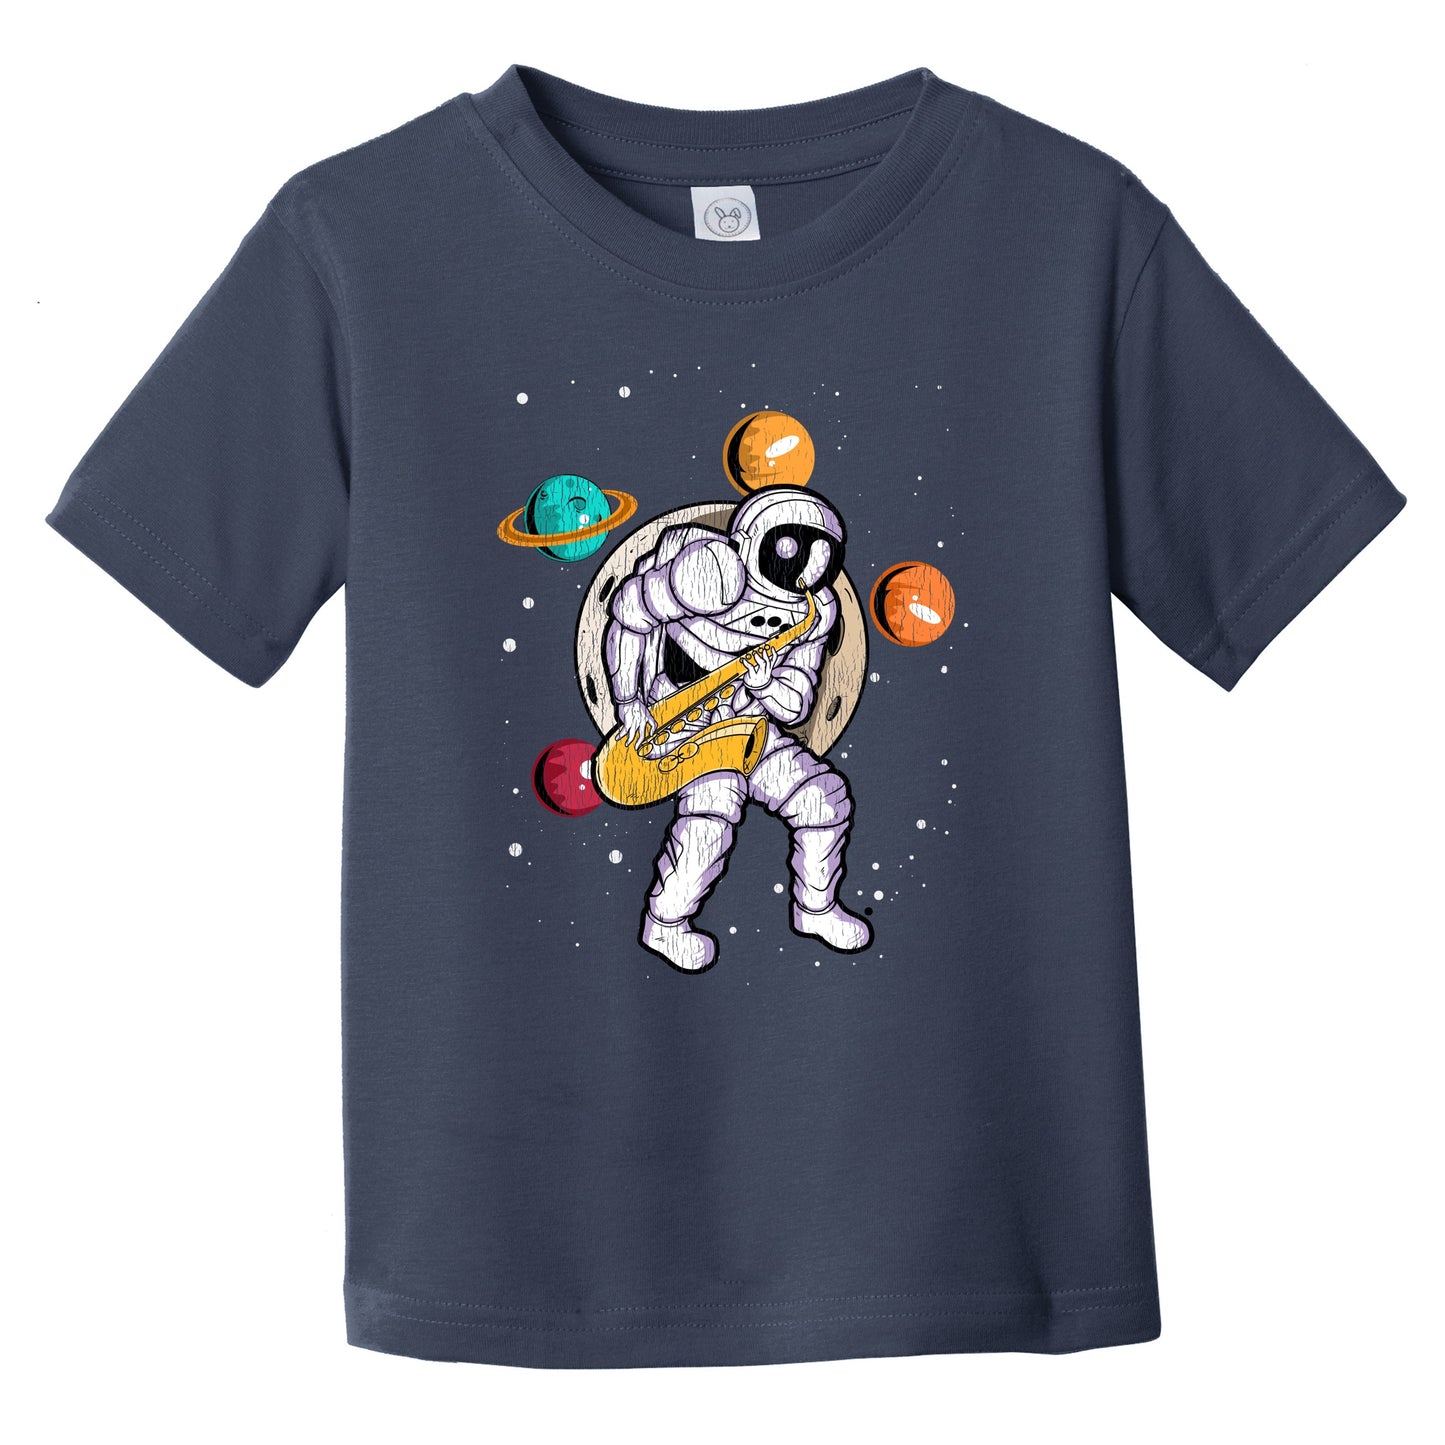 Sax Player Astronaut Outer Space Spaceman Saxophone Distressed Infant Toddler T-Shirt